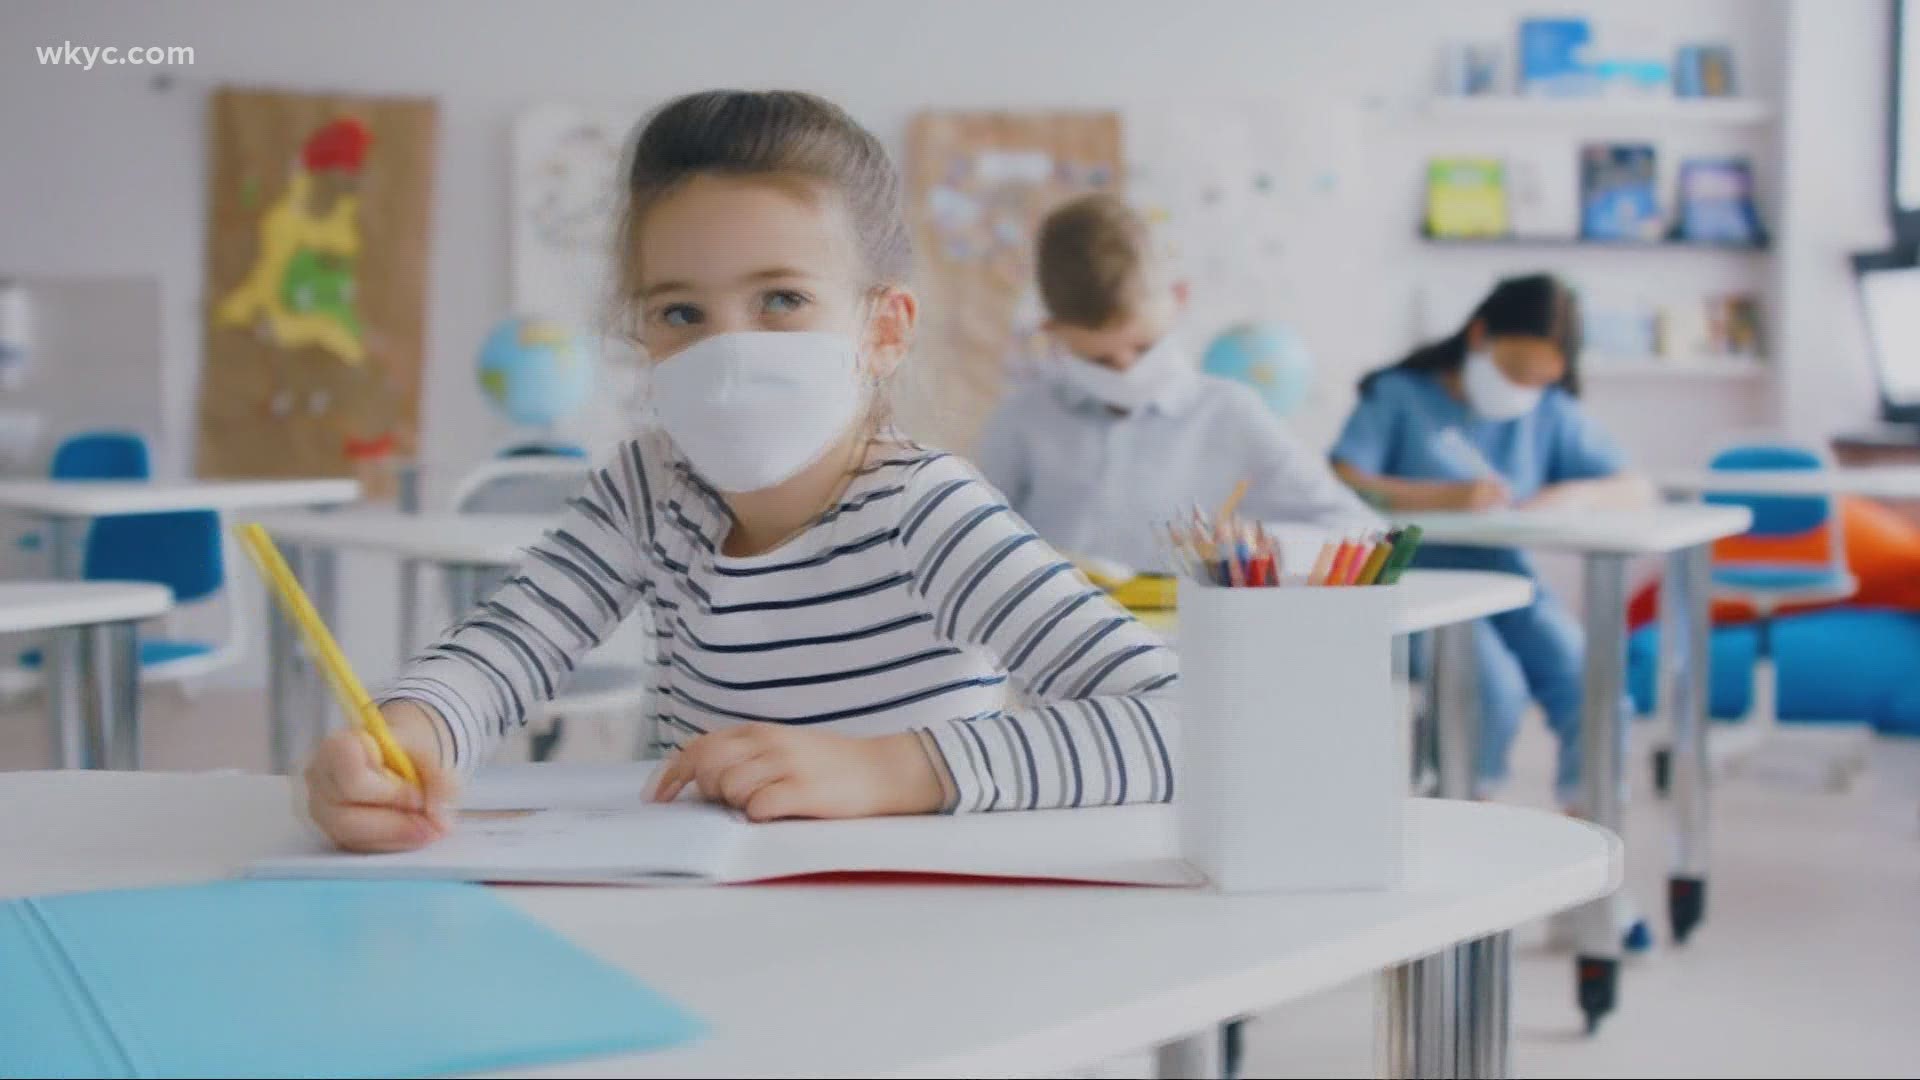 Oct. 6, 2020: What should you do if somebody in your child's classroom tests positive for COVID-19? Here's what a medical expert has to say.